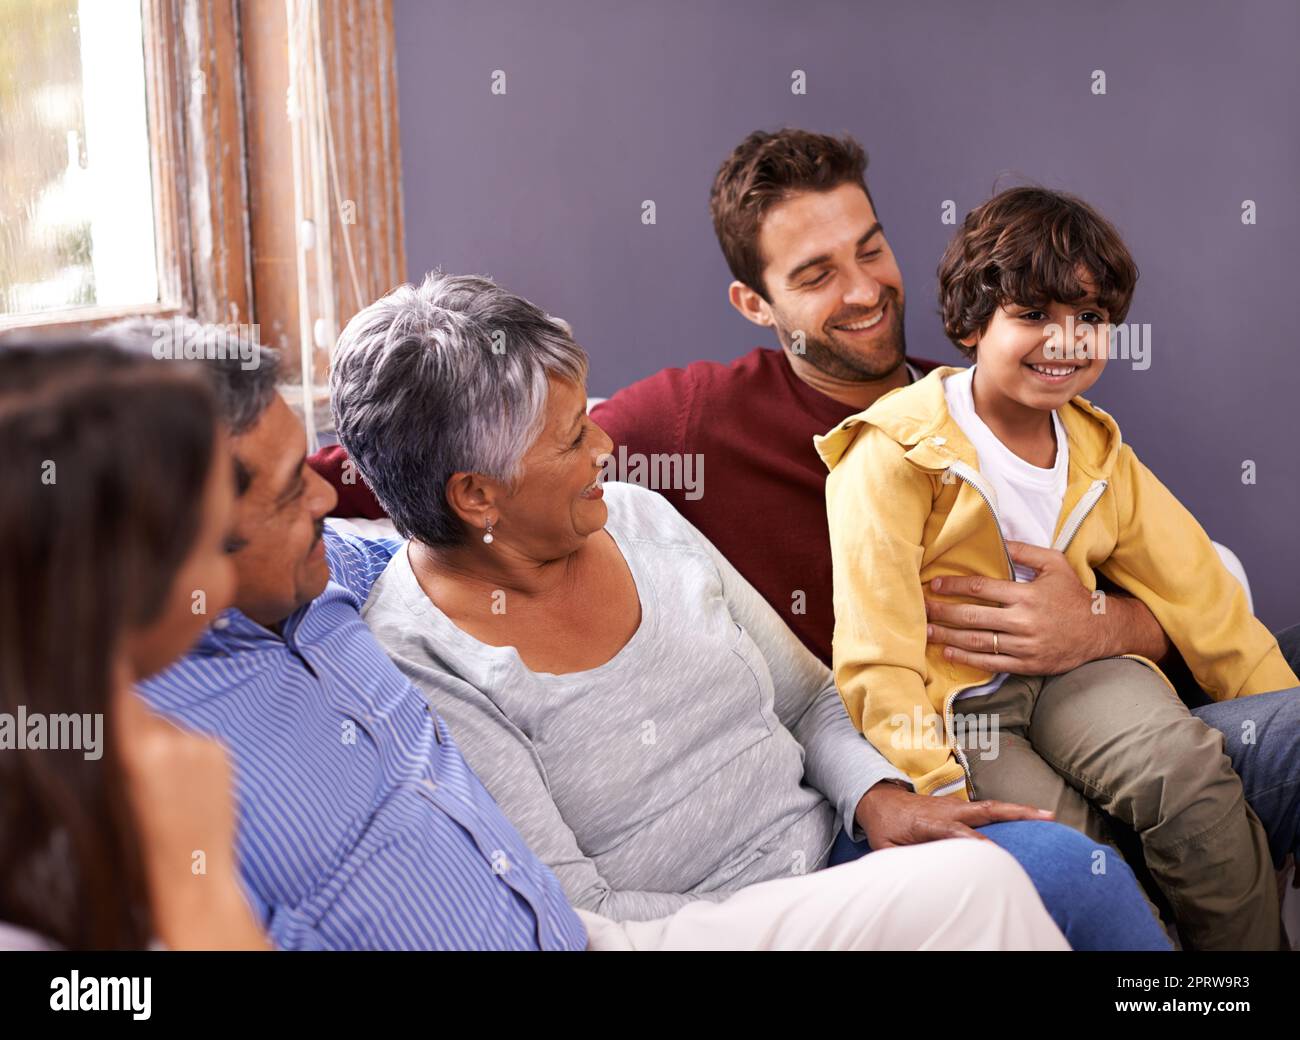 He brings joy to the family. A shot of a family bonding together in the living room. Stock Photo